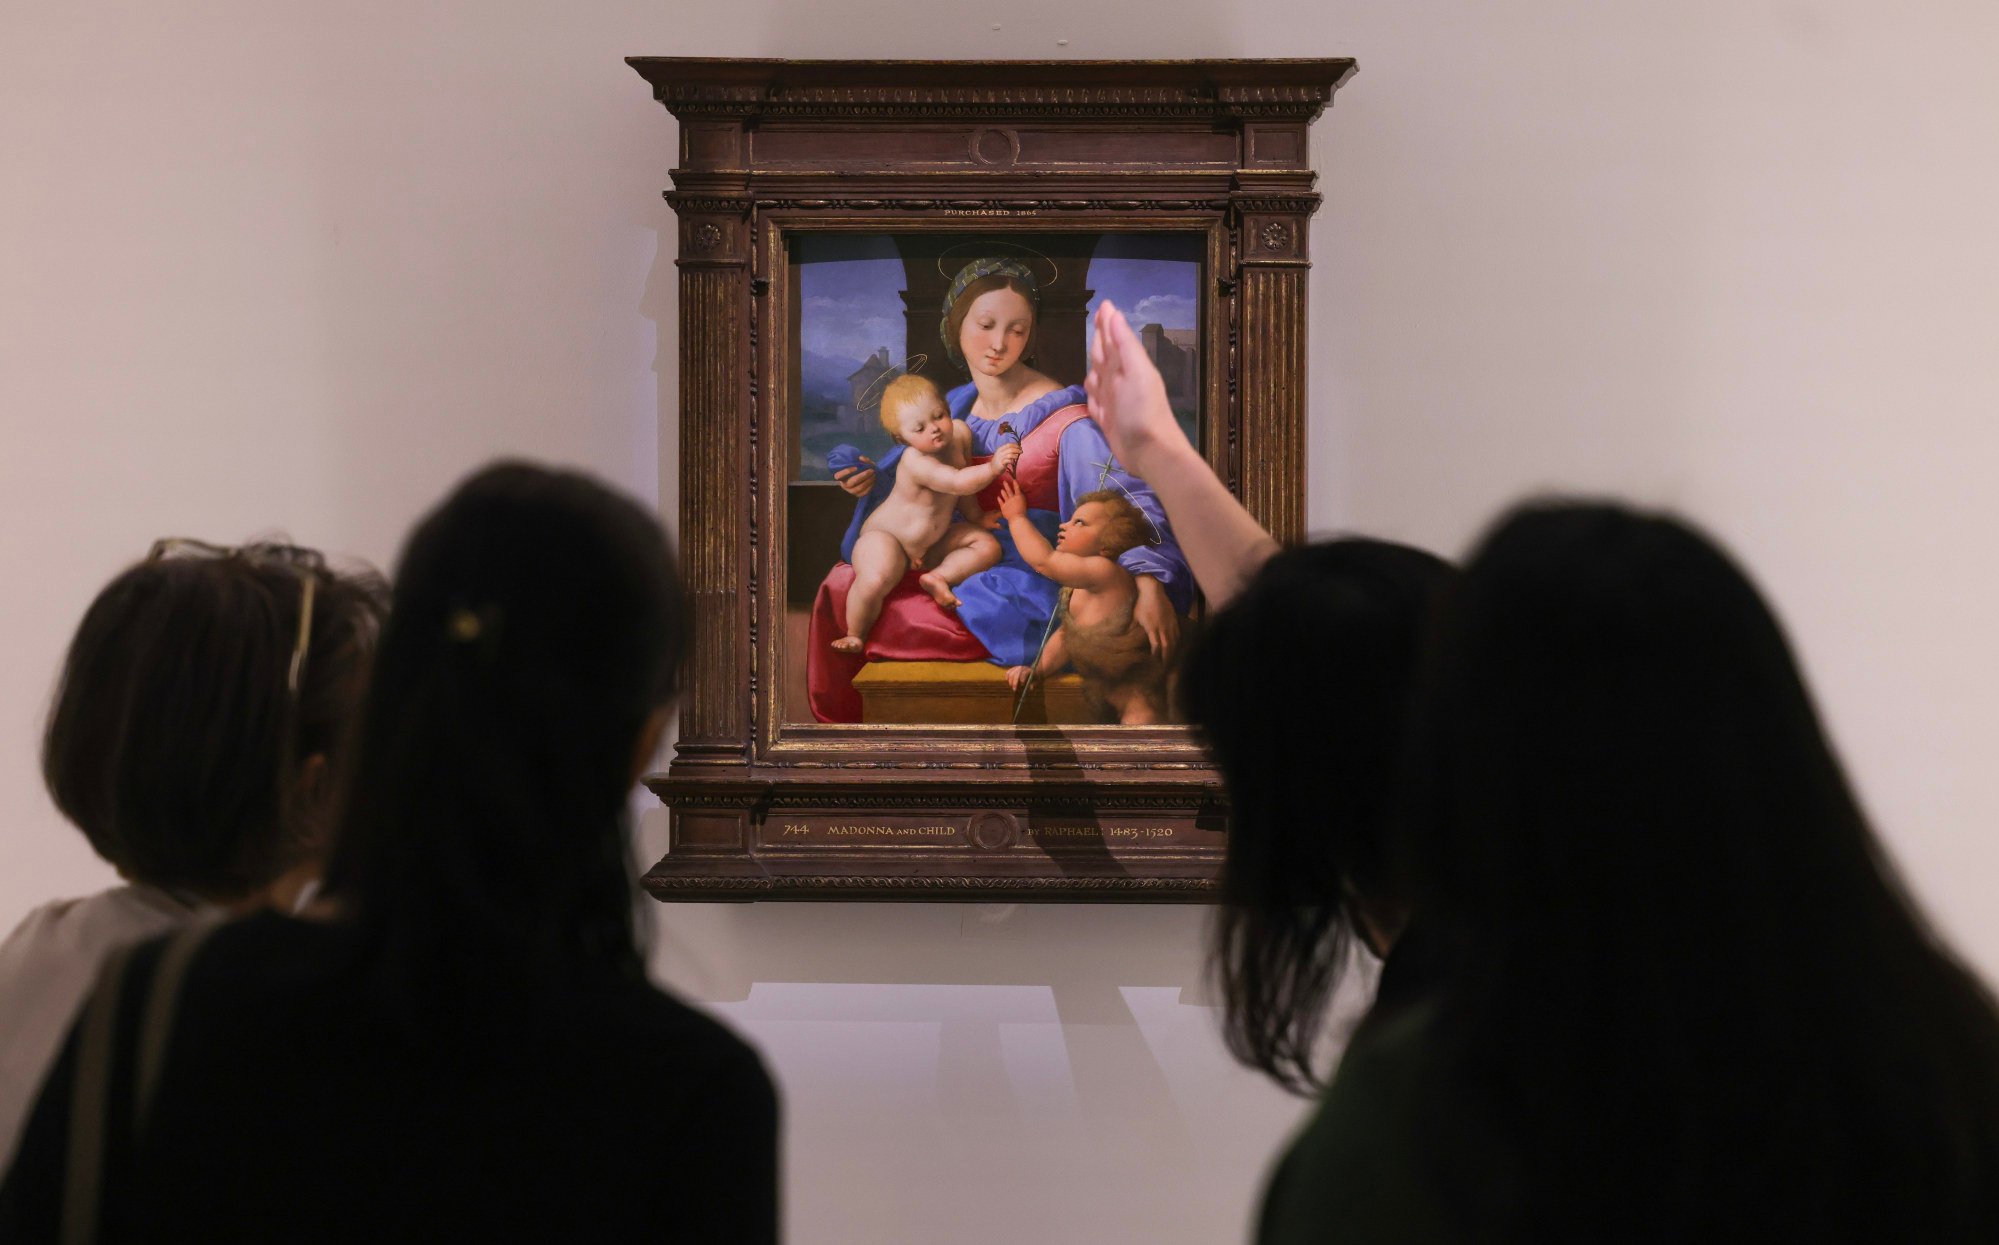 The Virgin and Child with the Infant Saint John the Baptist (“The Garvagh Madonna”) by Raphael is among the works on show. Photo: May Tse